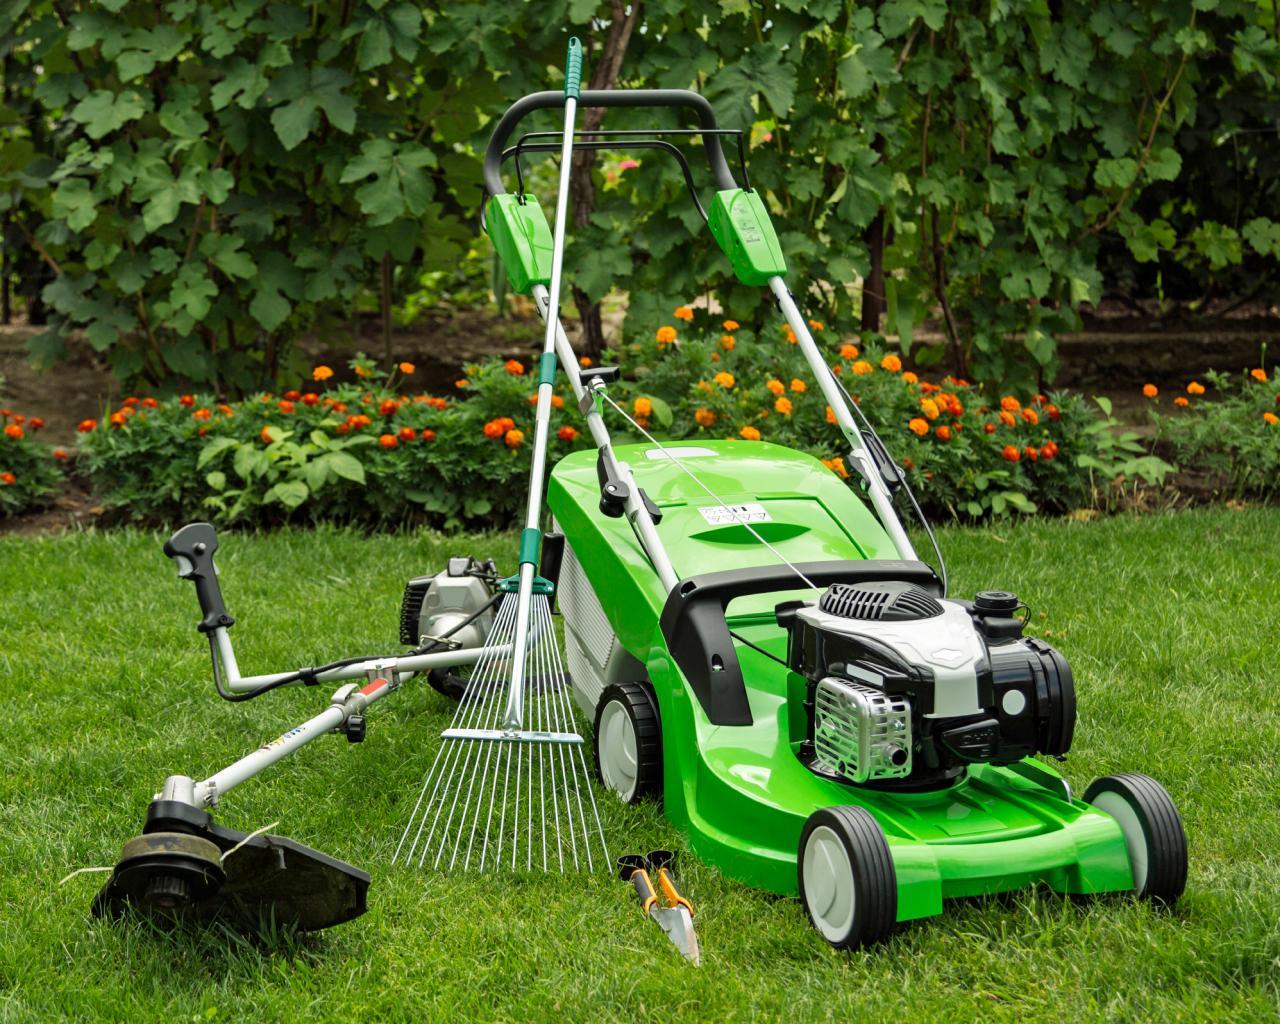 How to Care for Lawn and Garden Tools